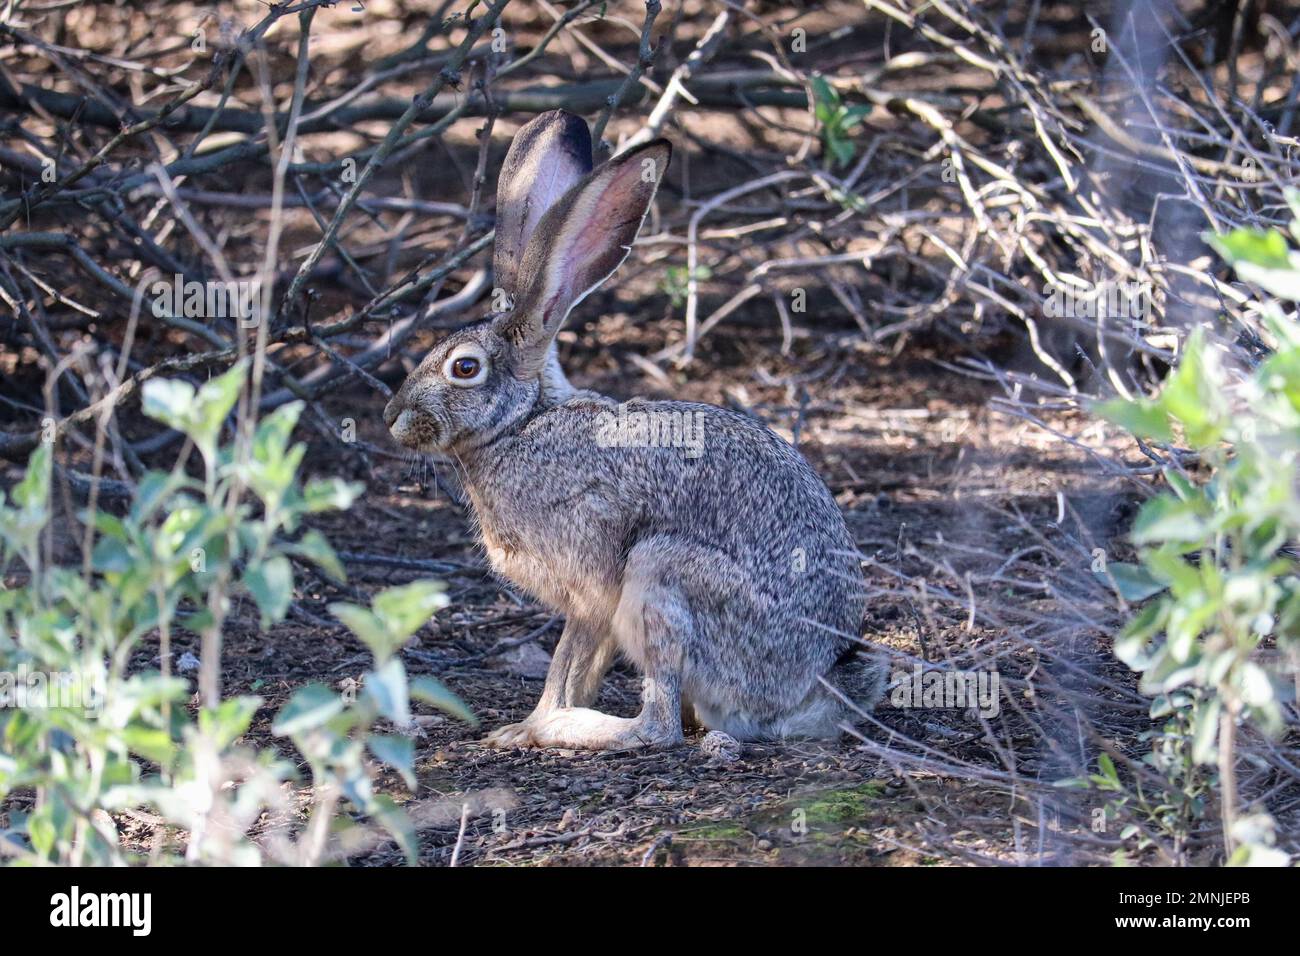 Black-tailed Jackrabbit or Lepus californicus standing in some brush at the Veterans oasis park in Arizona. Stock Photo